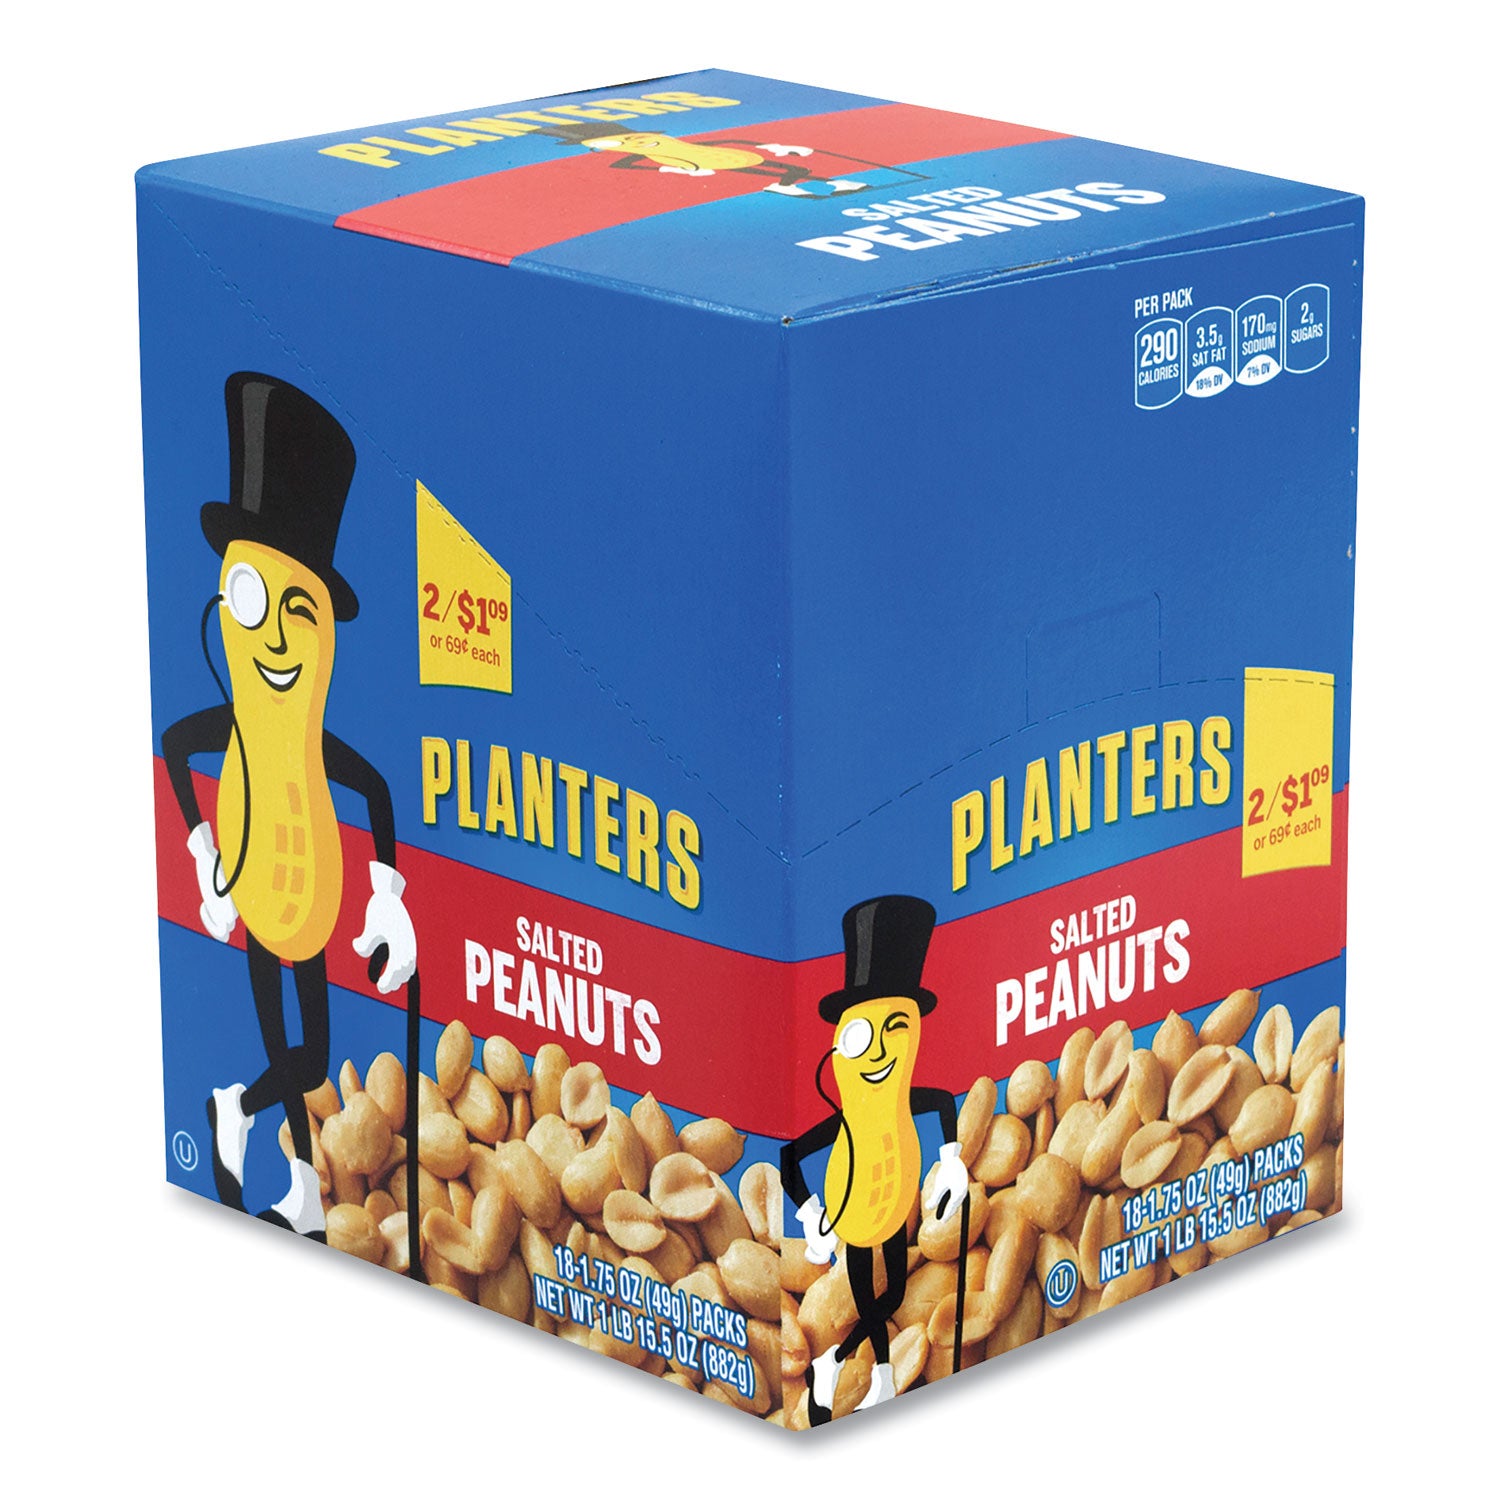 salted-peanuts-175-oz-pack-18-packs-box-ships-in-1-3-business-days_grr20900627 - 1